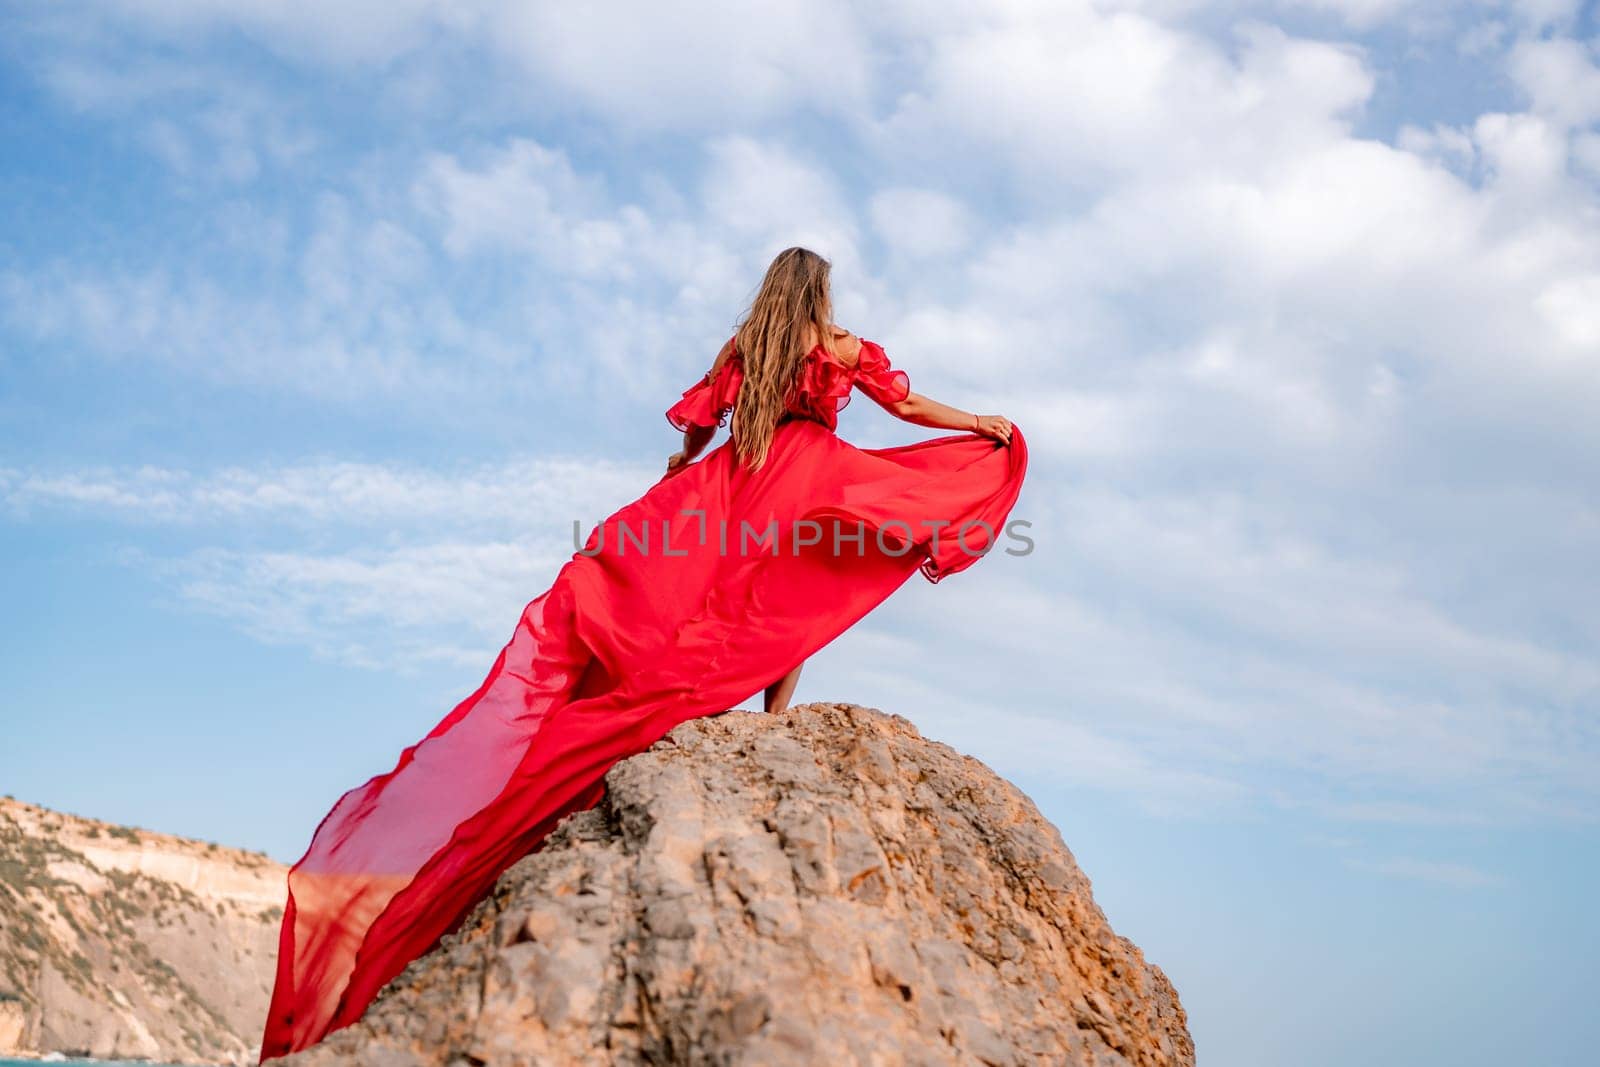 woman sky red dress. Woman with long hair on a sunny seashore in a red flowing dress, back view, silk fabric waving in the wind. Against the backdrop of the blue sky and mountains on the seashore